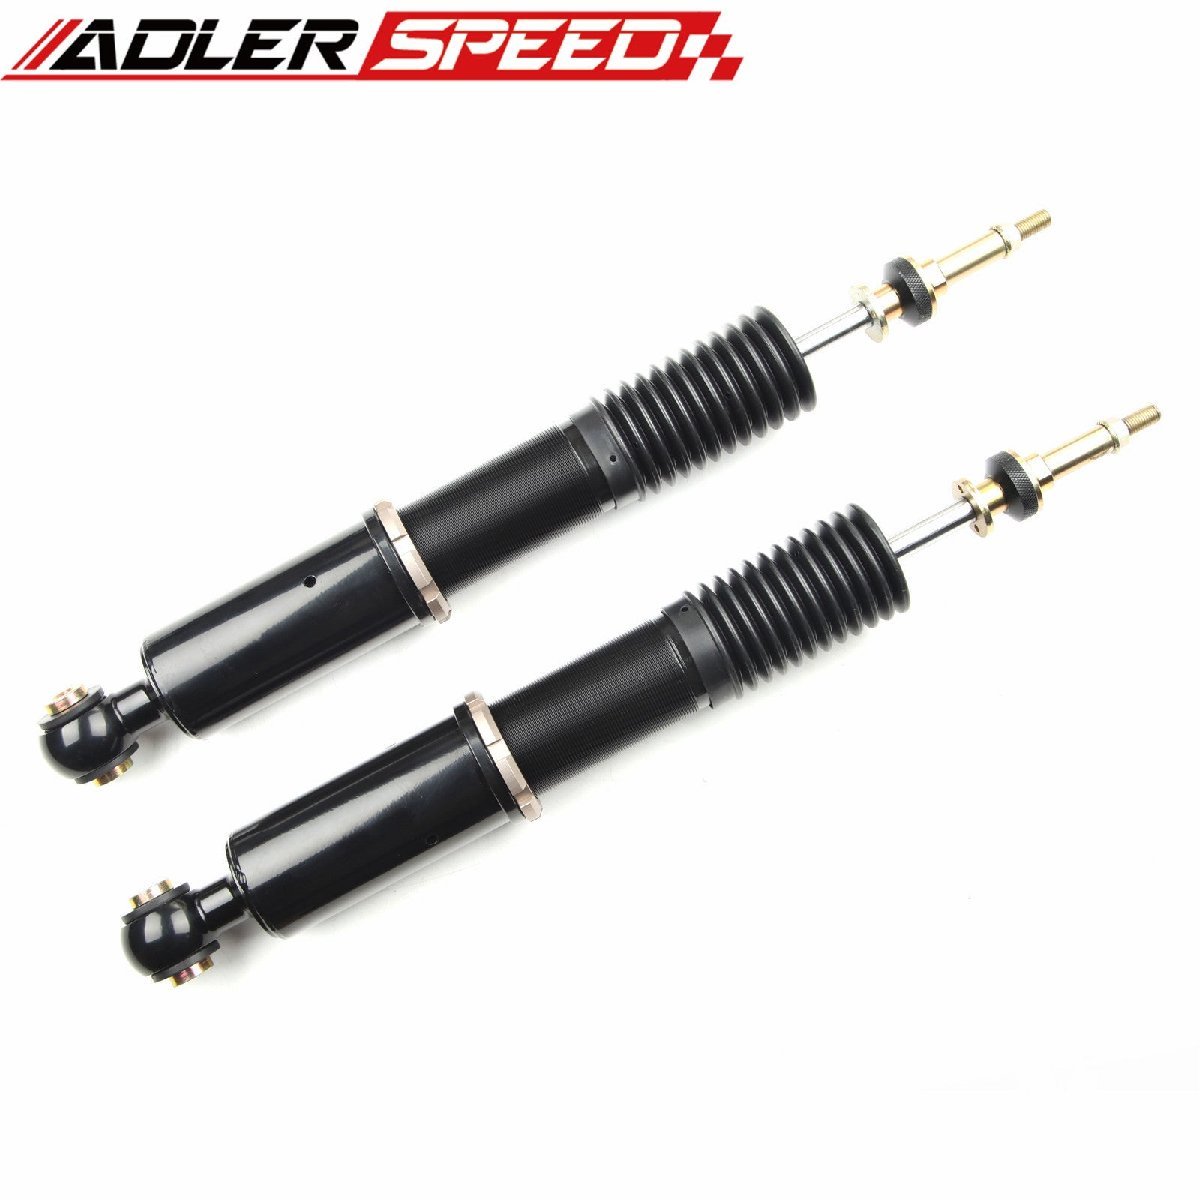  shock absorber Mercedes Benz E Class C207 2WD 10-17 total length adjustment suspension 32 step attenuation ADLERSPEED